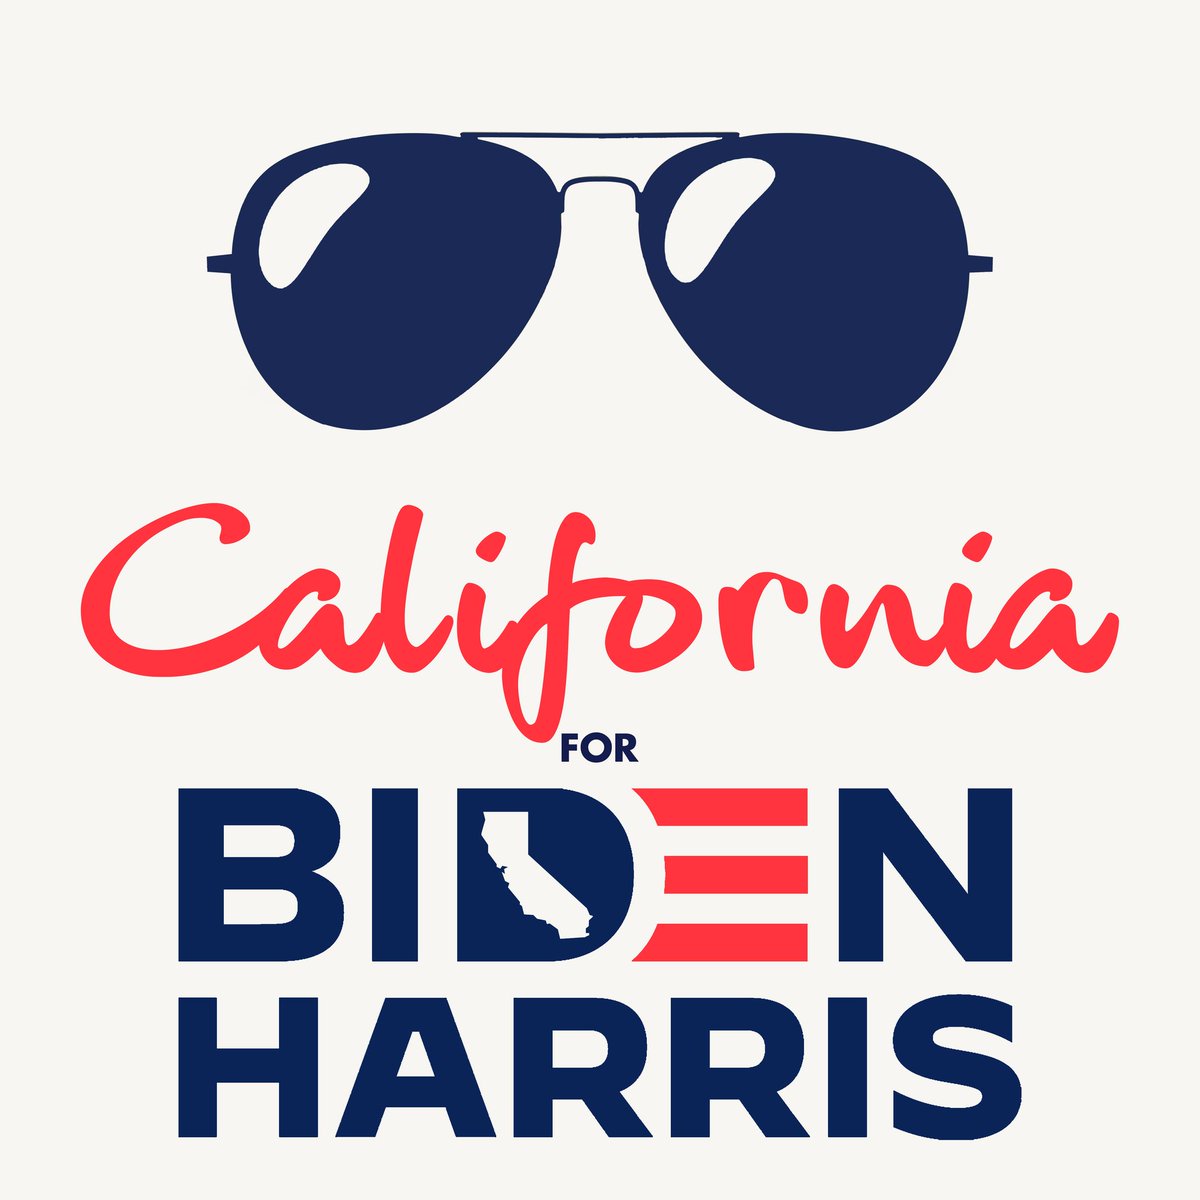 ICYMI my husband  @viva_verde is incredibly talented and made these beautiful state coalition graphics for  #BidenHarris supporters. More otw and he takes requests for priority! RT your state if you're  #RidinWithBidenHarris 1/8  #Alaska  #Arizona  #California  #Colorado